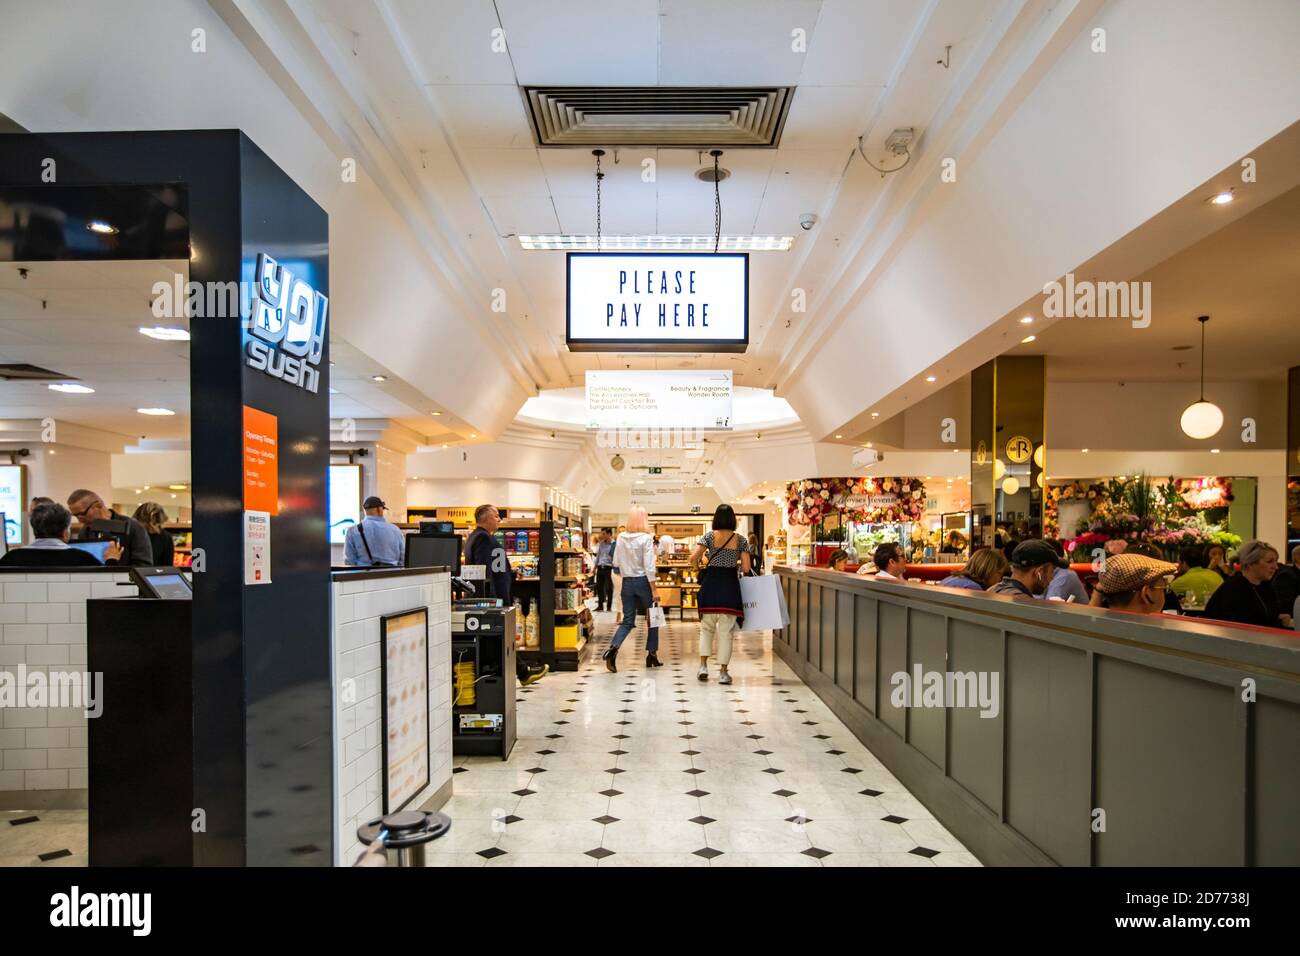 Selfridges food hall indoor store in London, UK, September 20, 2019: Please pay here sign inside a Selfridges food hall London uk. Stock Photo